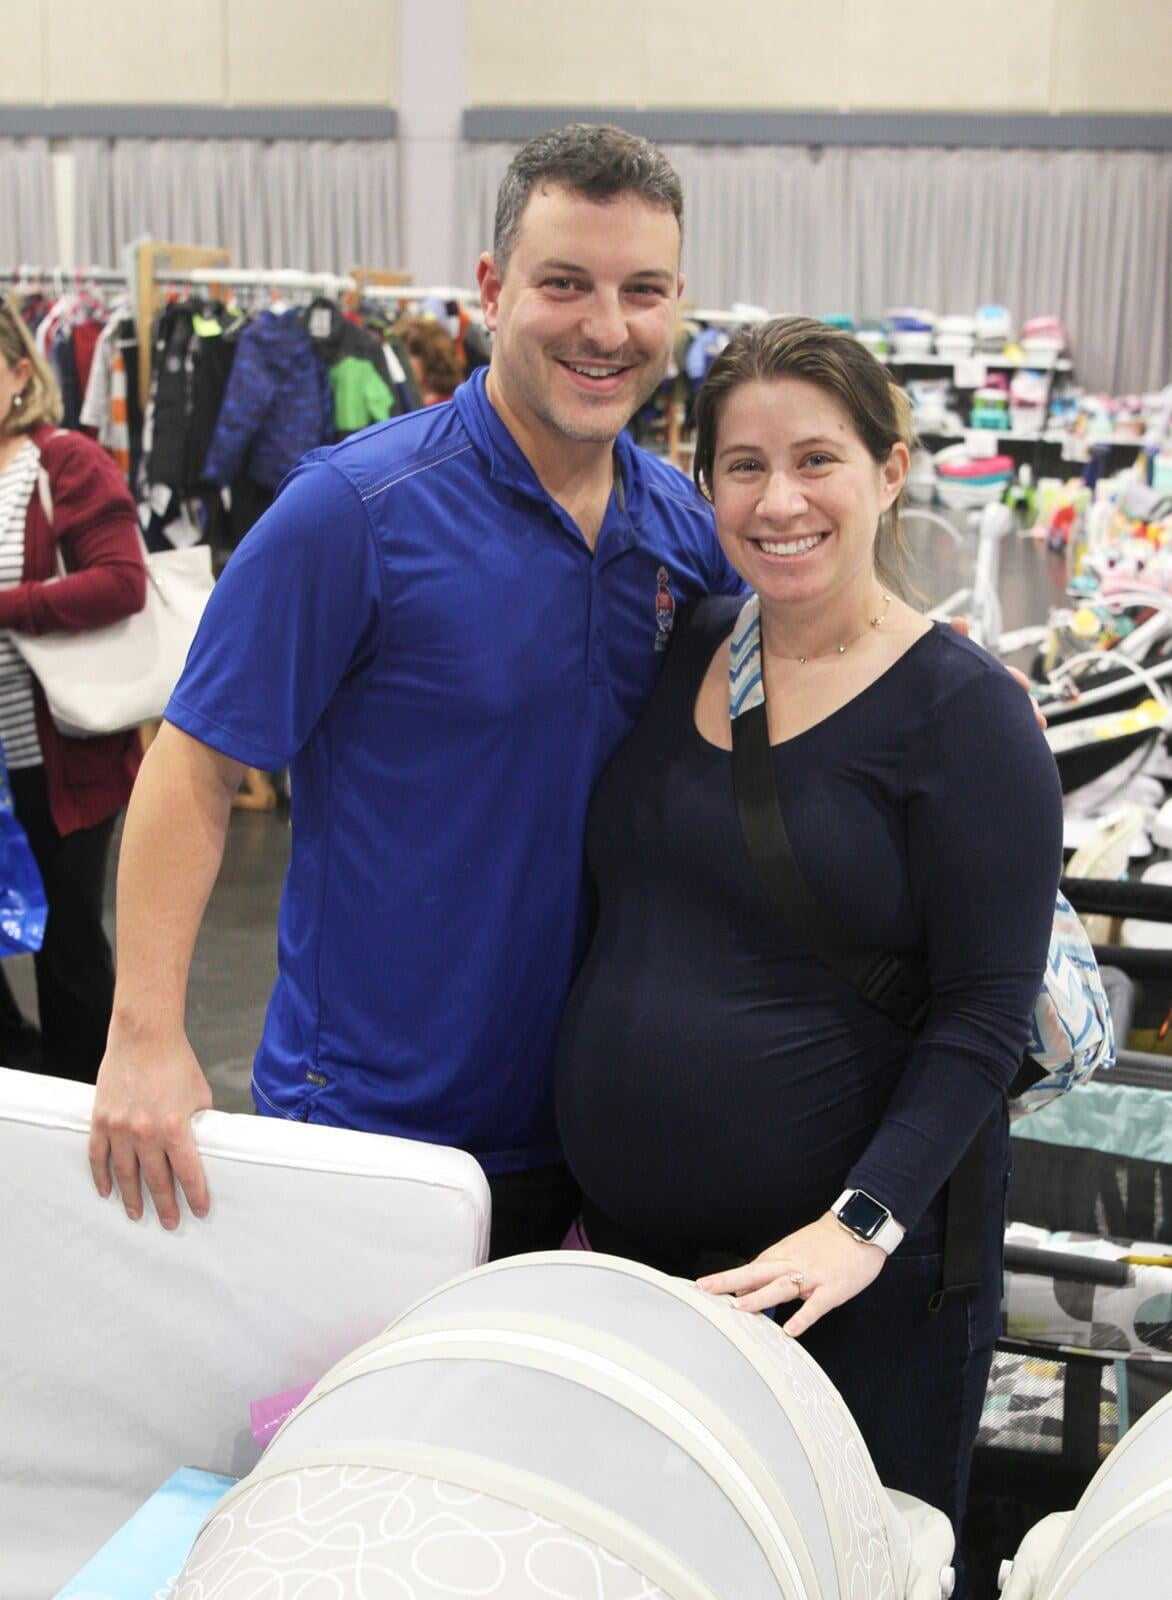 A set of expectant parents at a recent JBF sale in Overland Park.